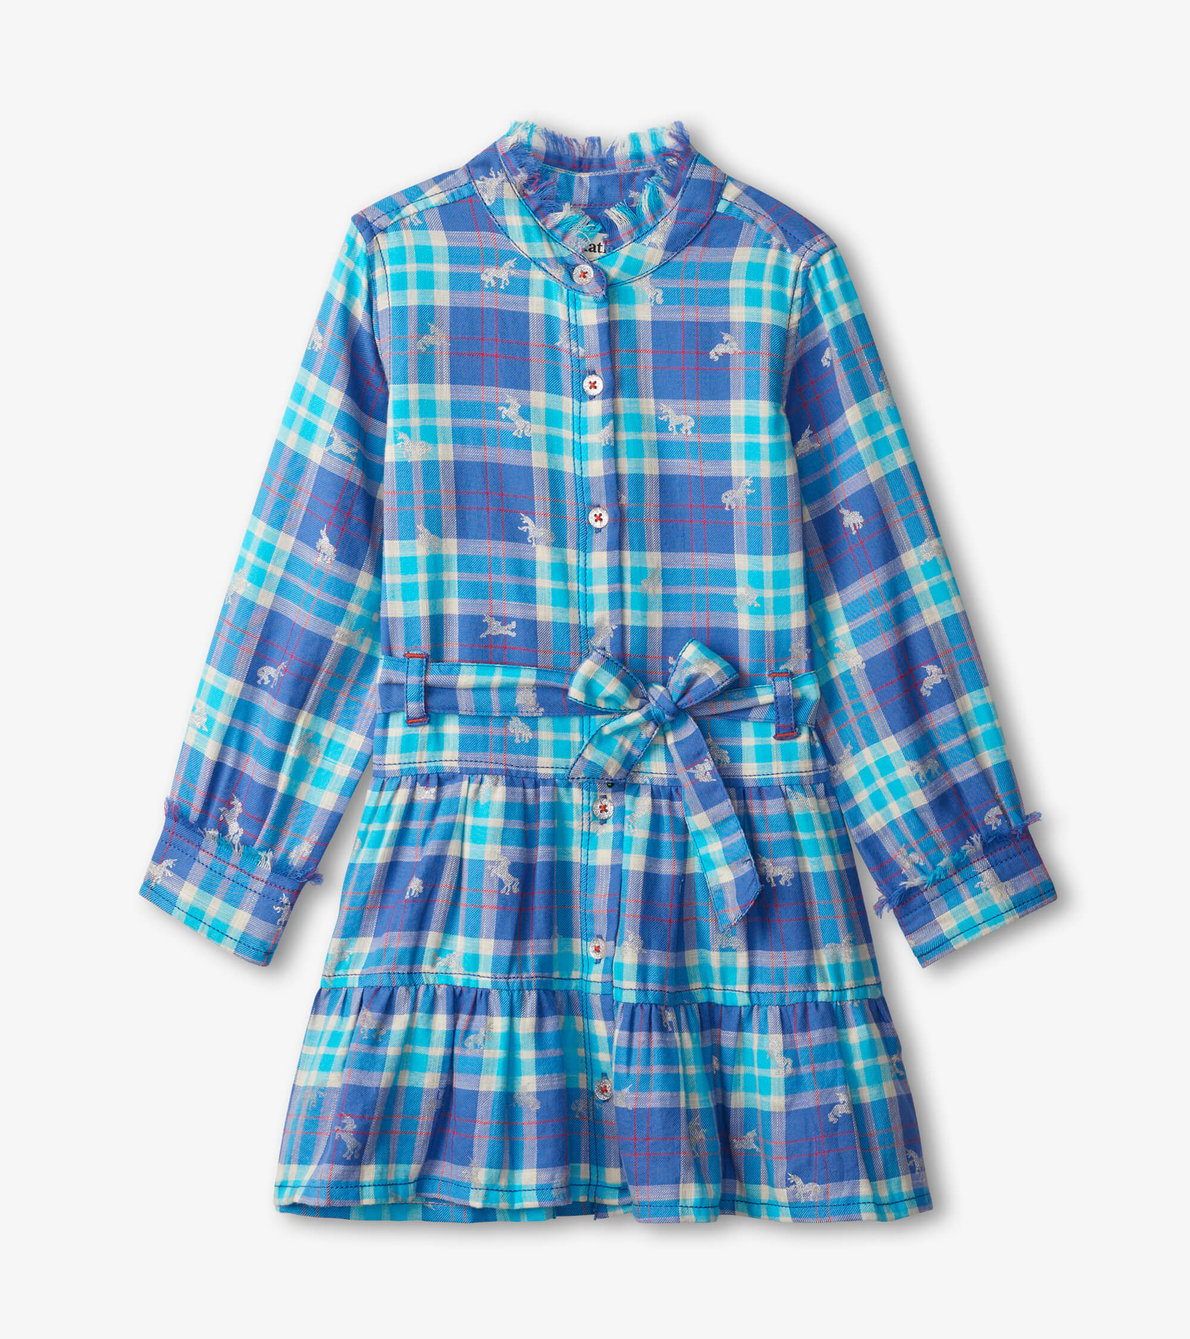 View larger image of Shimmer Unicorns Plaid Button Down Shirt Dress